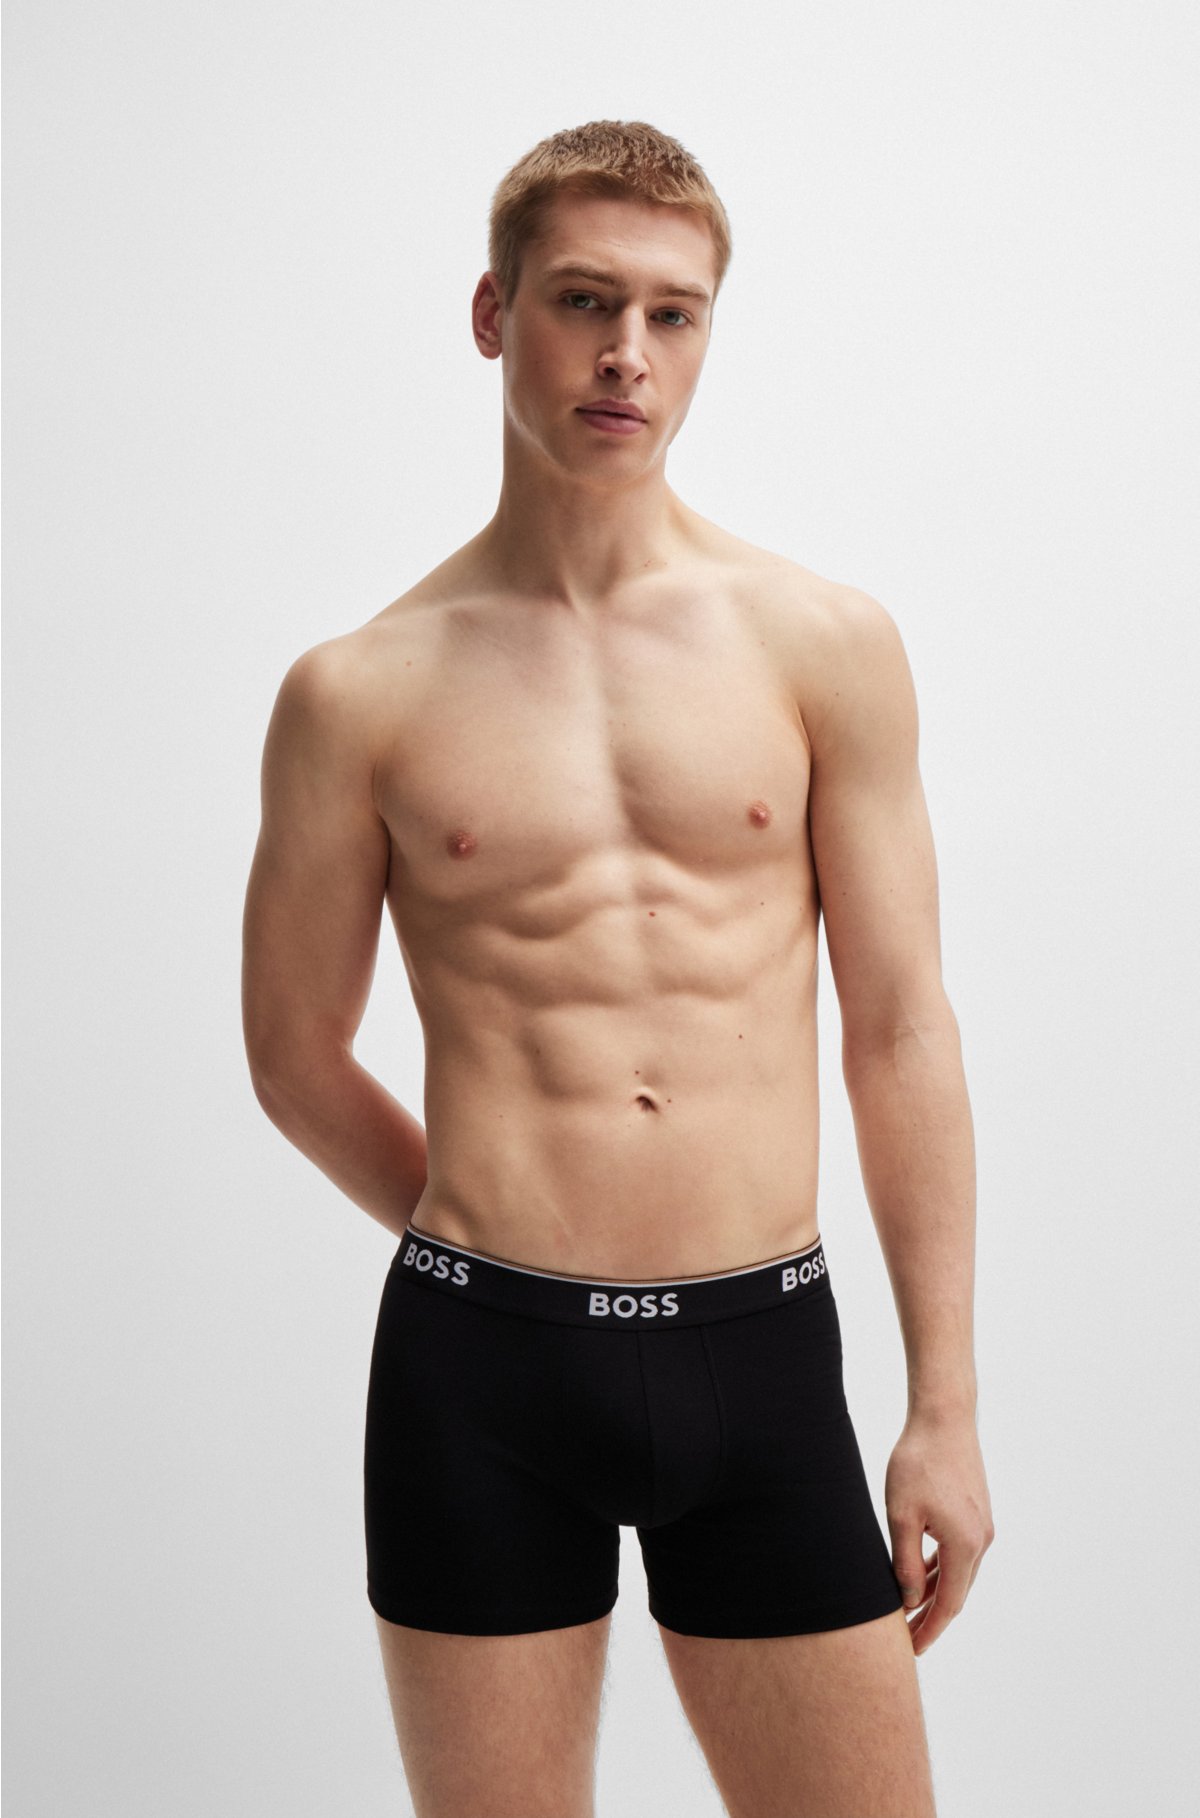 stretch-cotton briefs boxer of with Three-pack - BOSS logos